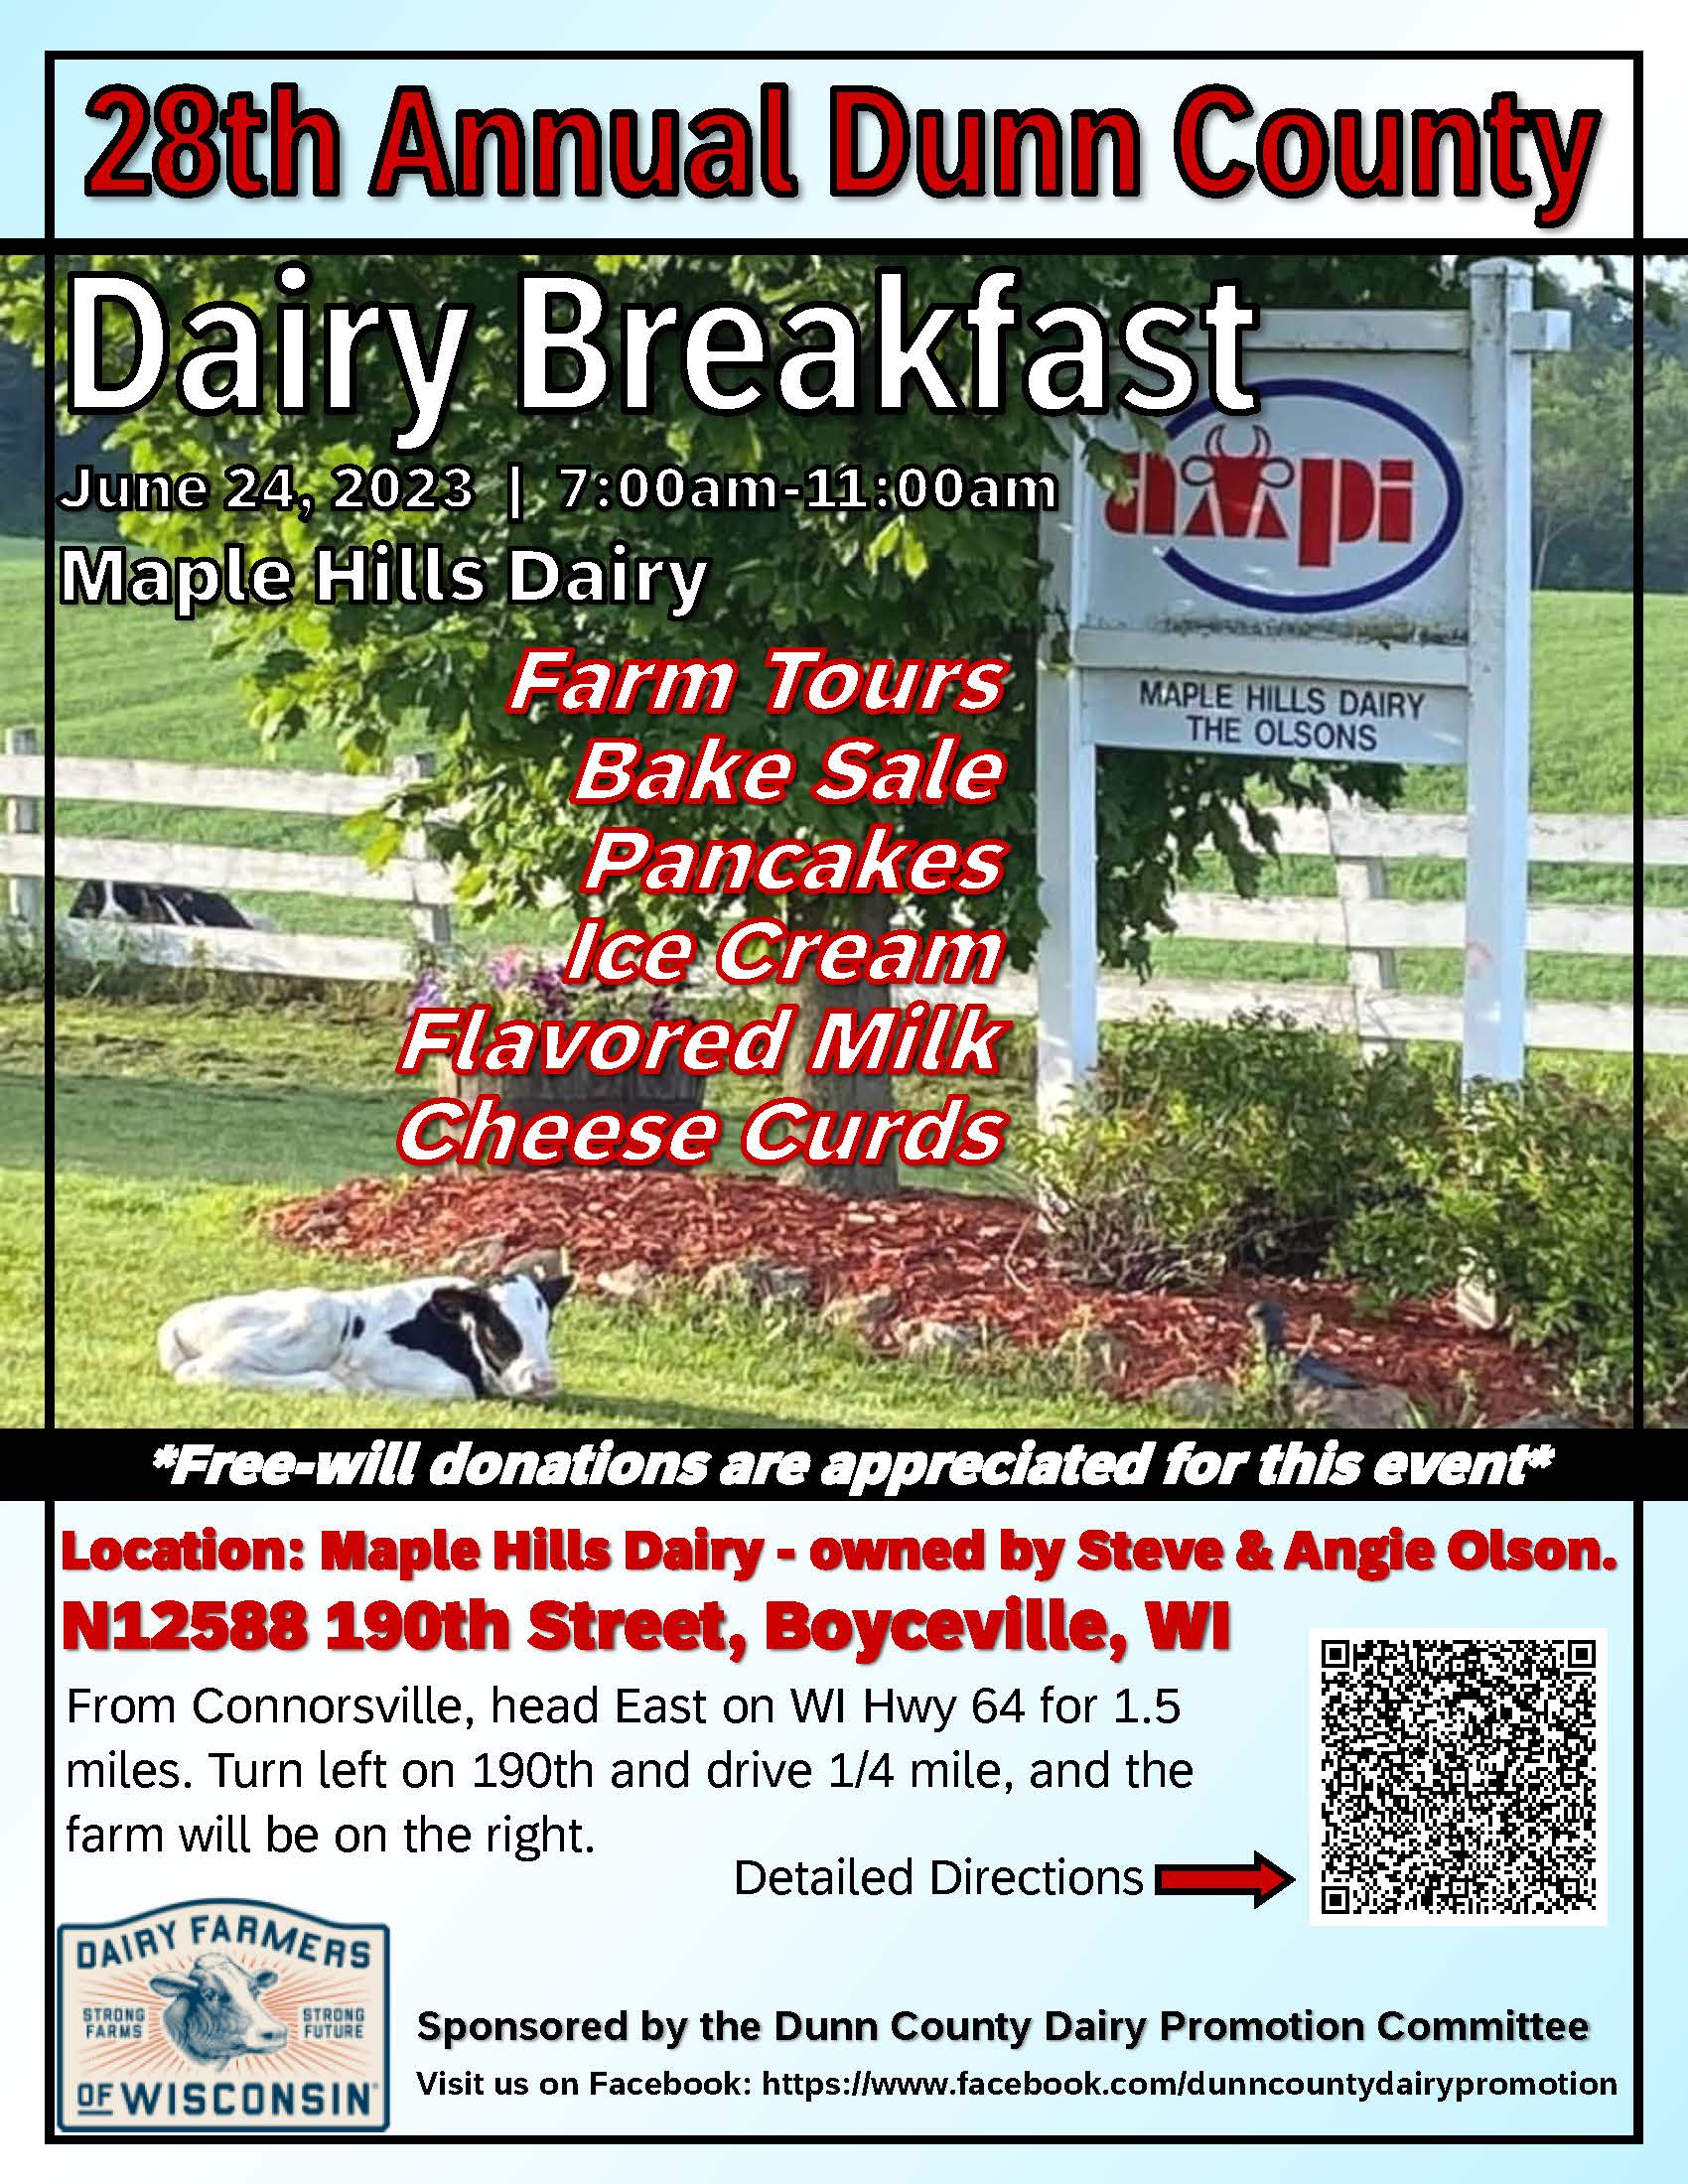 28th Annual Dunn County Dairy Breakfast Extension Dunn County